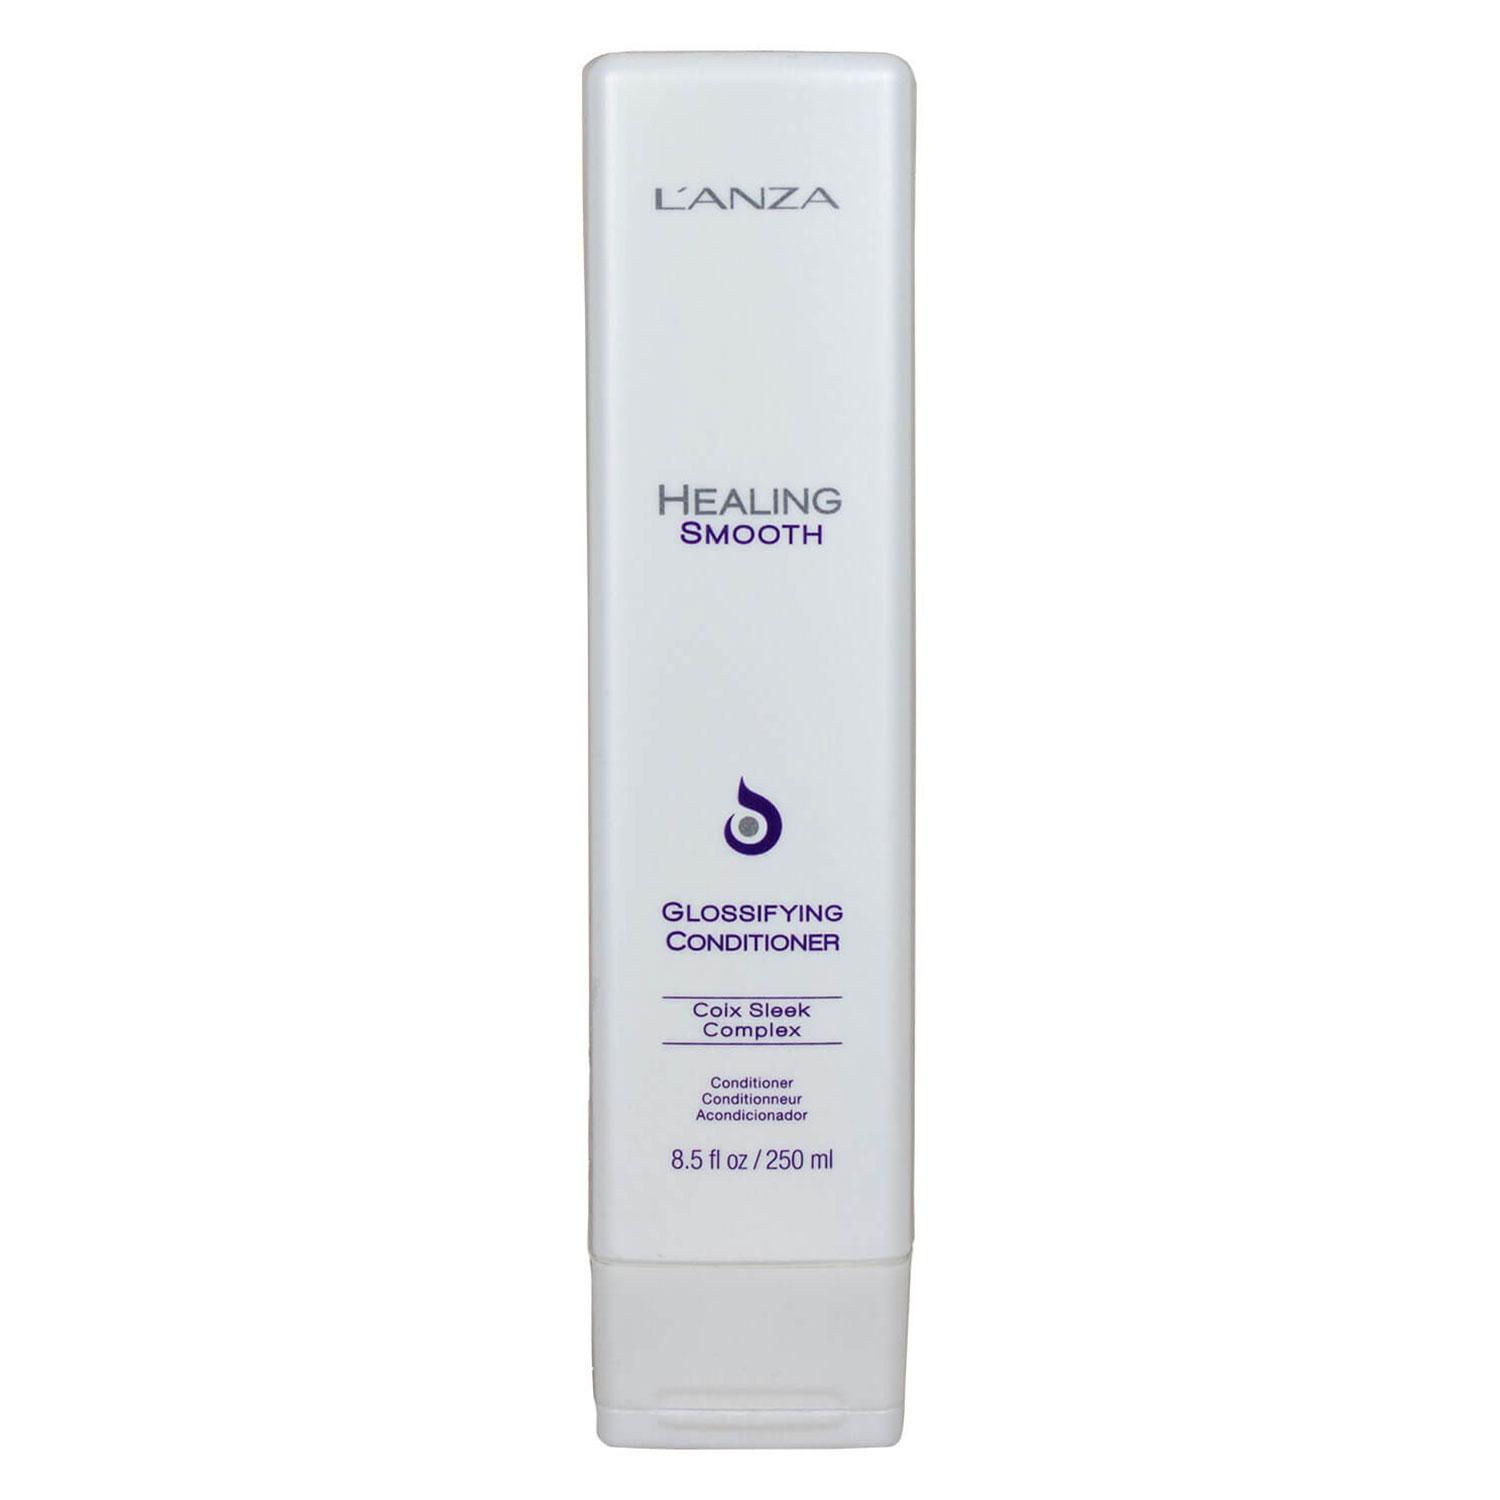 Healing Smooth - Glossifying Conditioner